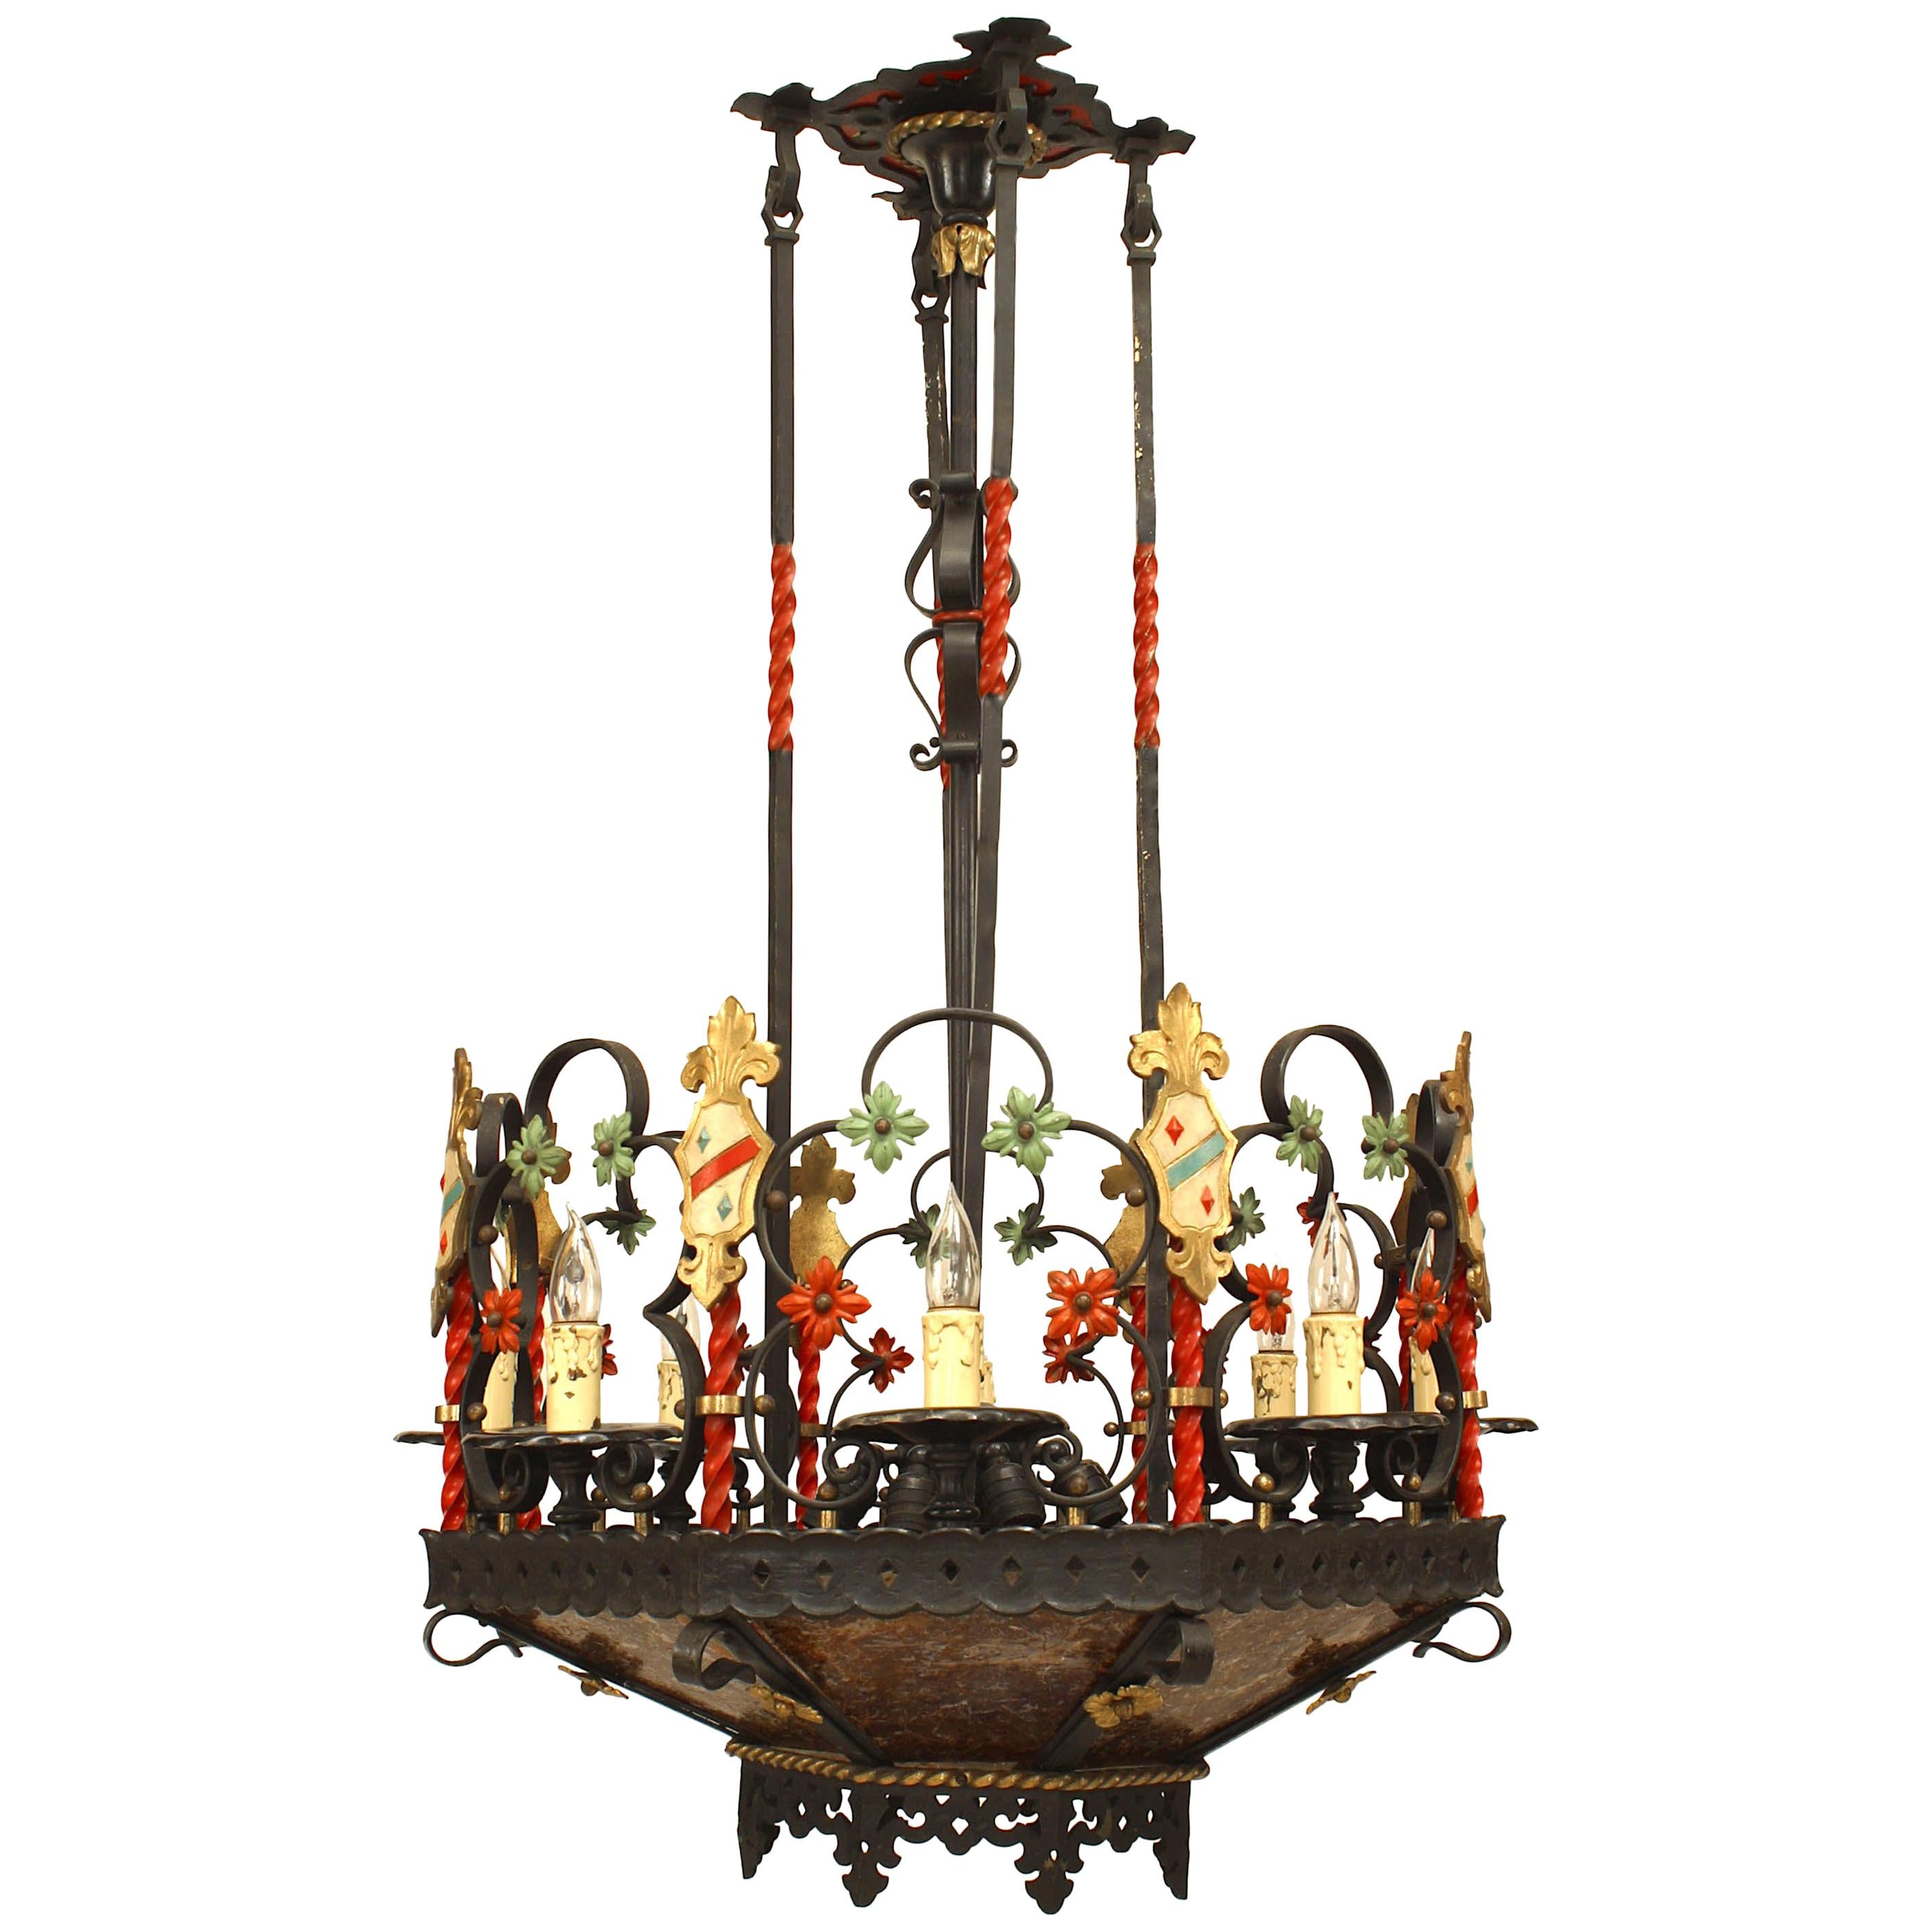 English Gothic Revival Style Wrought Iron Painted Shield Chandelier For Sale